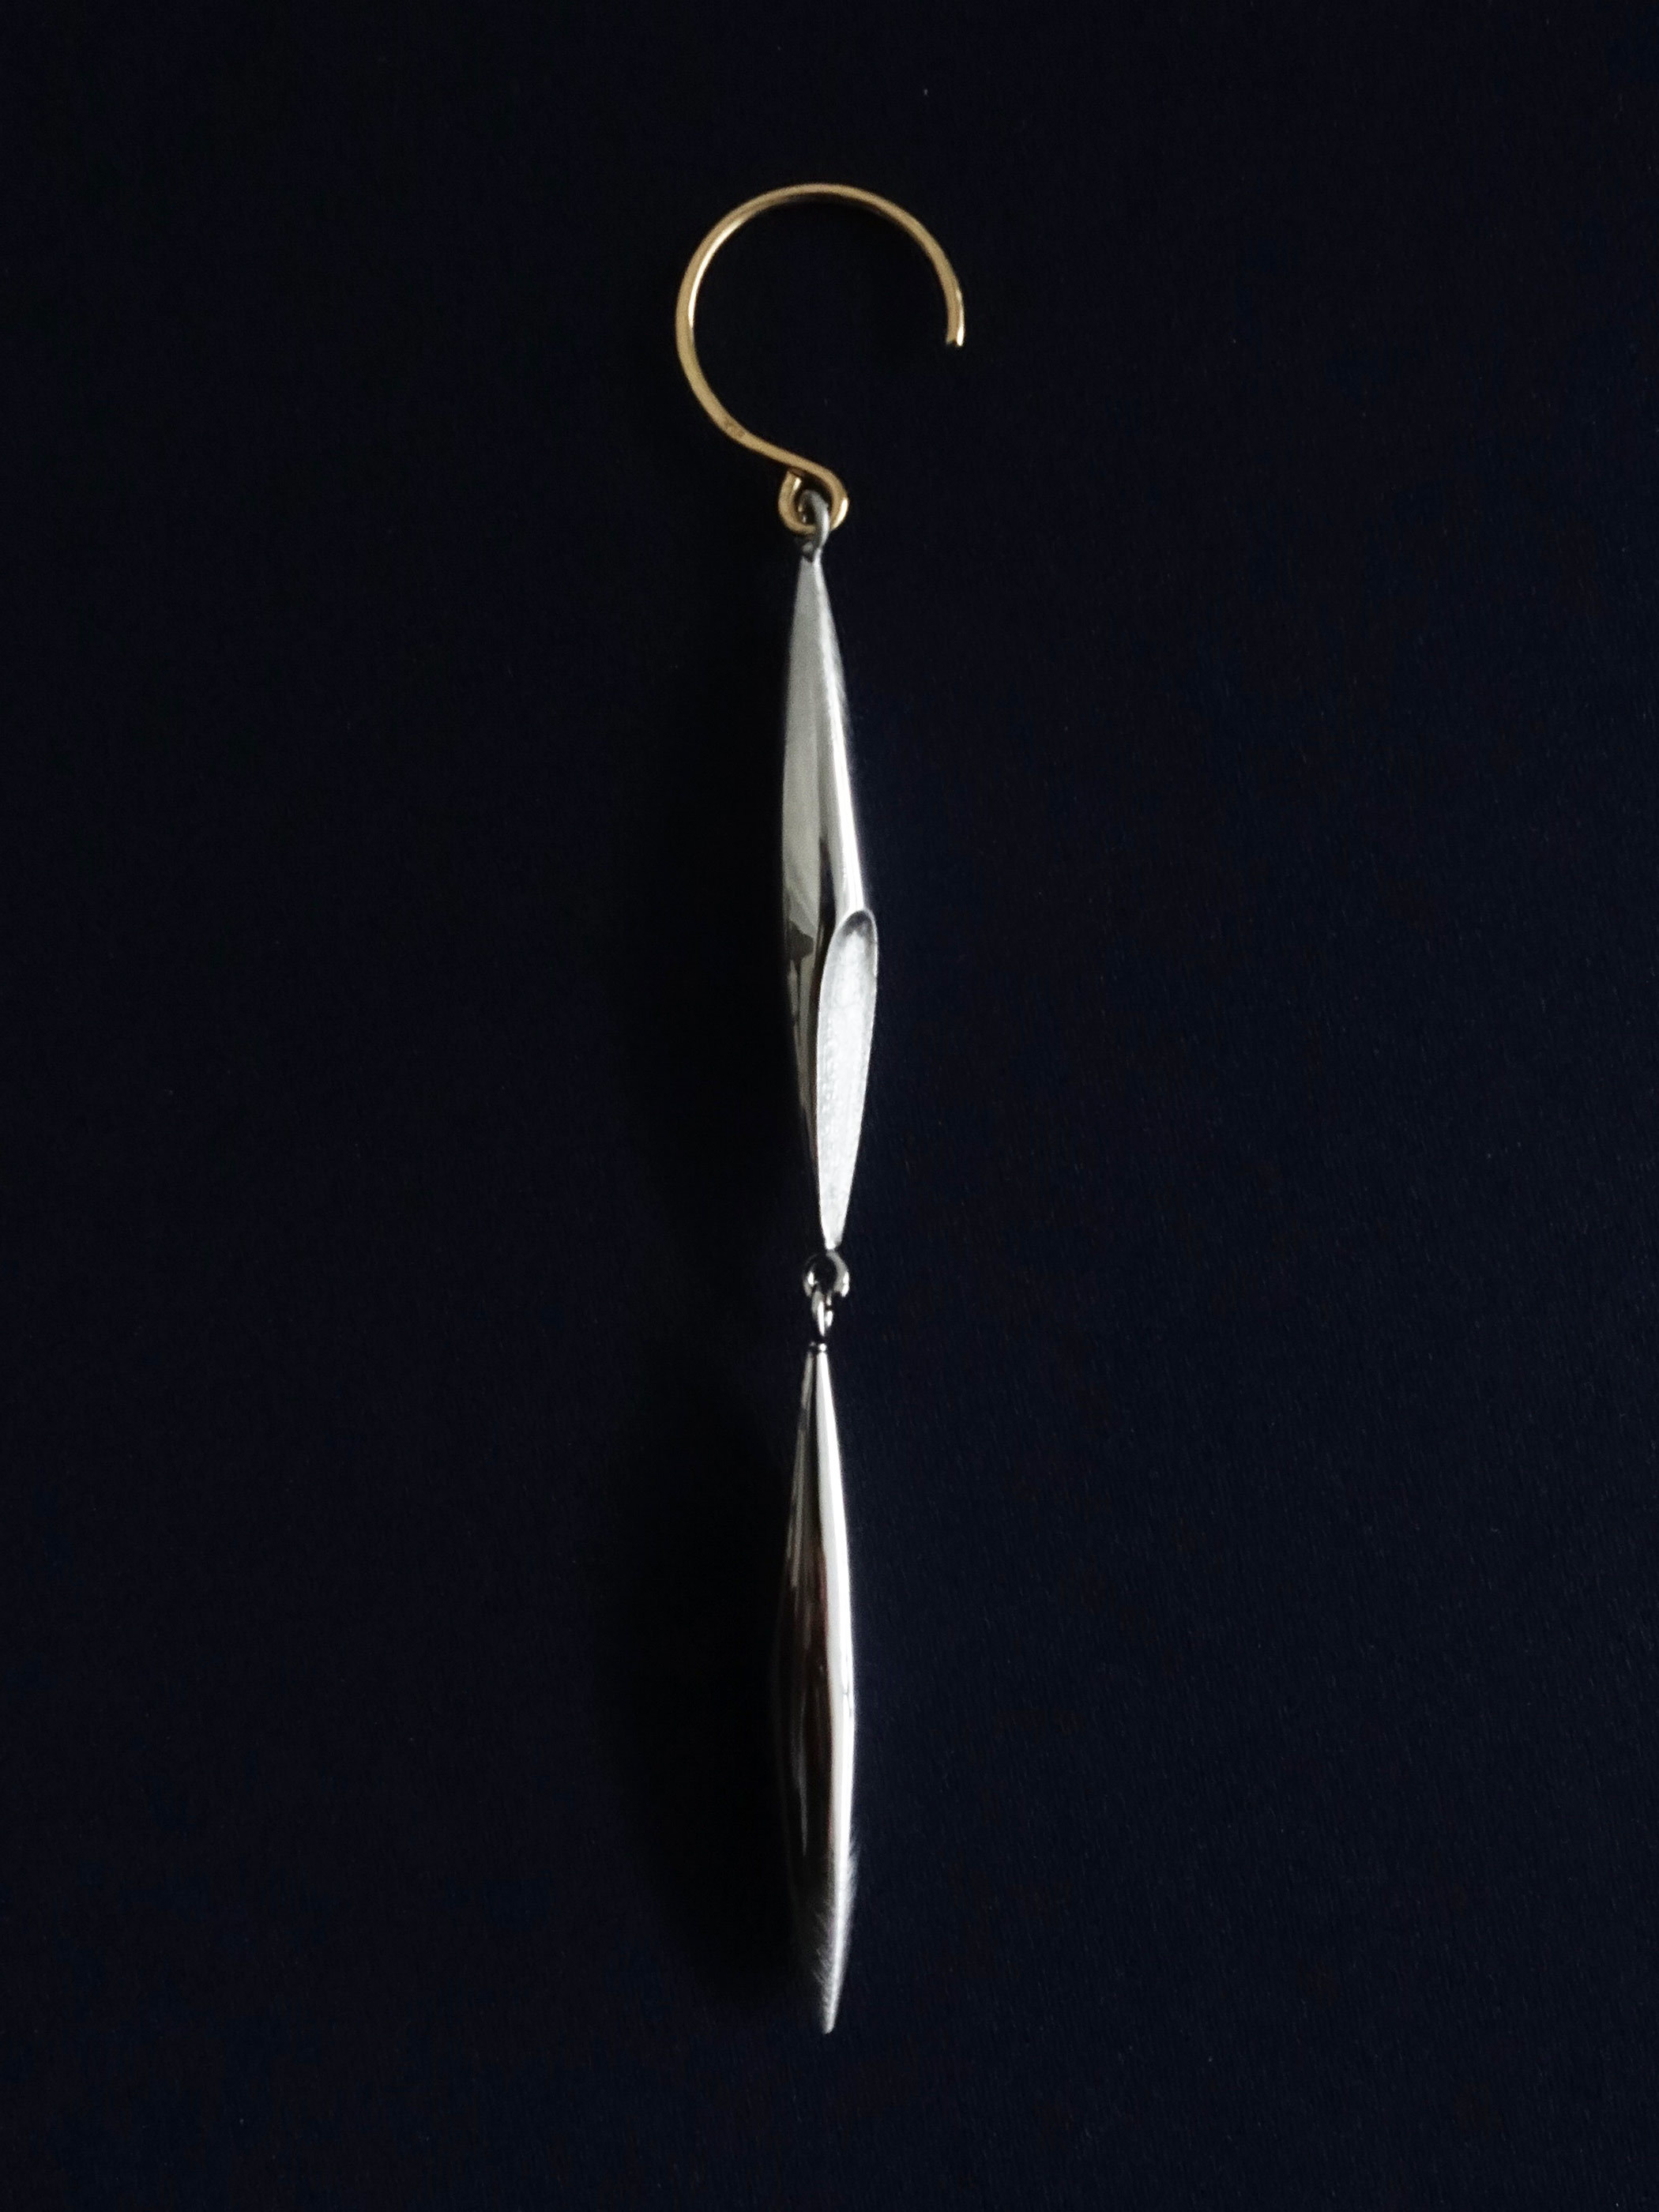 〈RECOLLECTION〉1:3 LINK earring